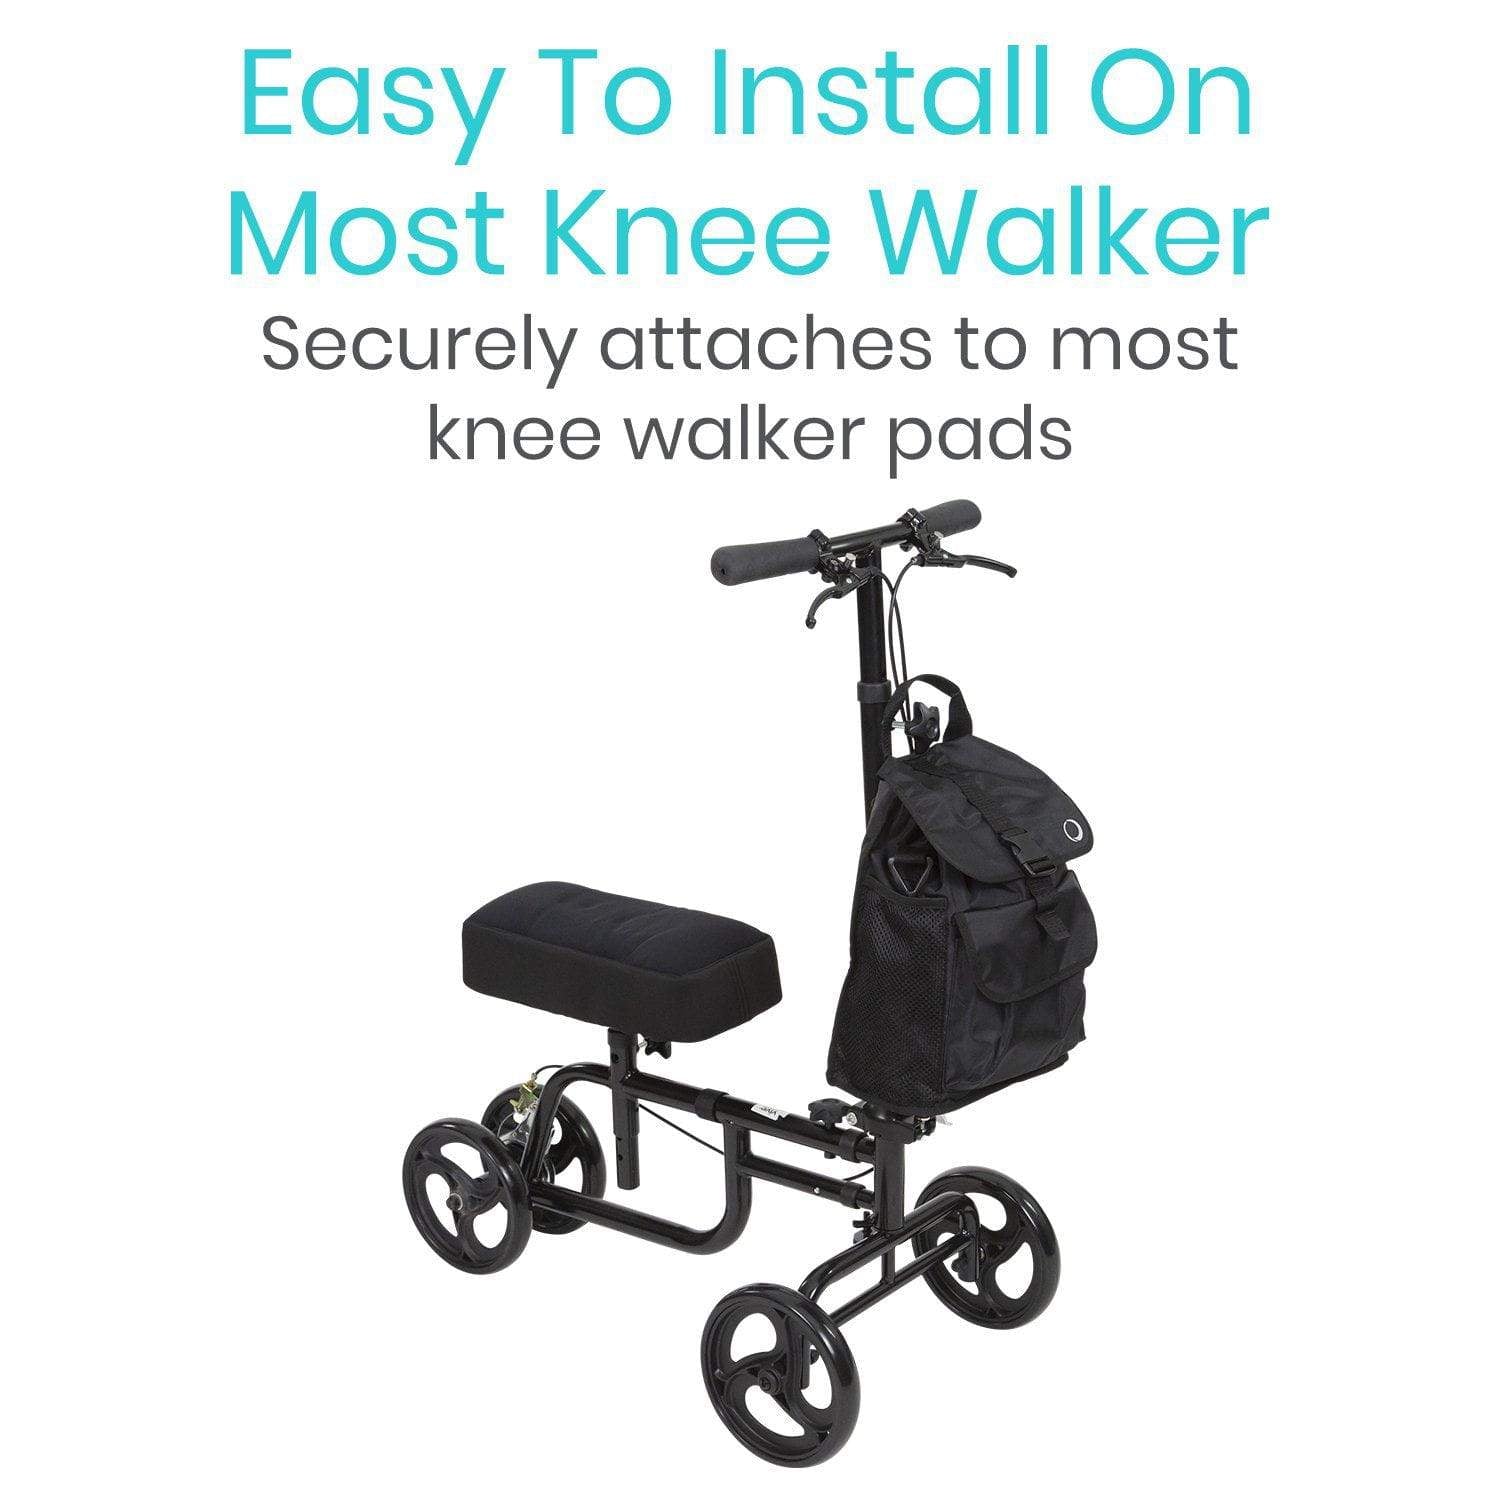 ISSYAUTO Knee Scooter Memory Foam,3 inch Thick Foam Knee Pad and Cover - Fits Most Knee Walker Models,Black, Size: 3 Height